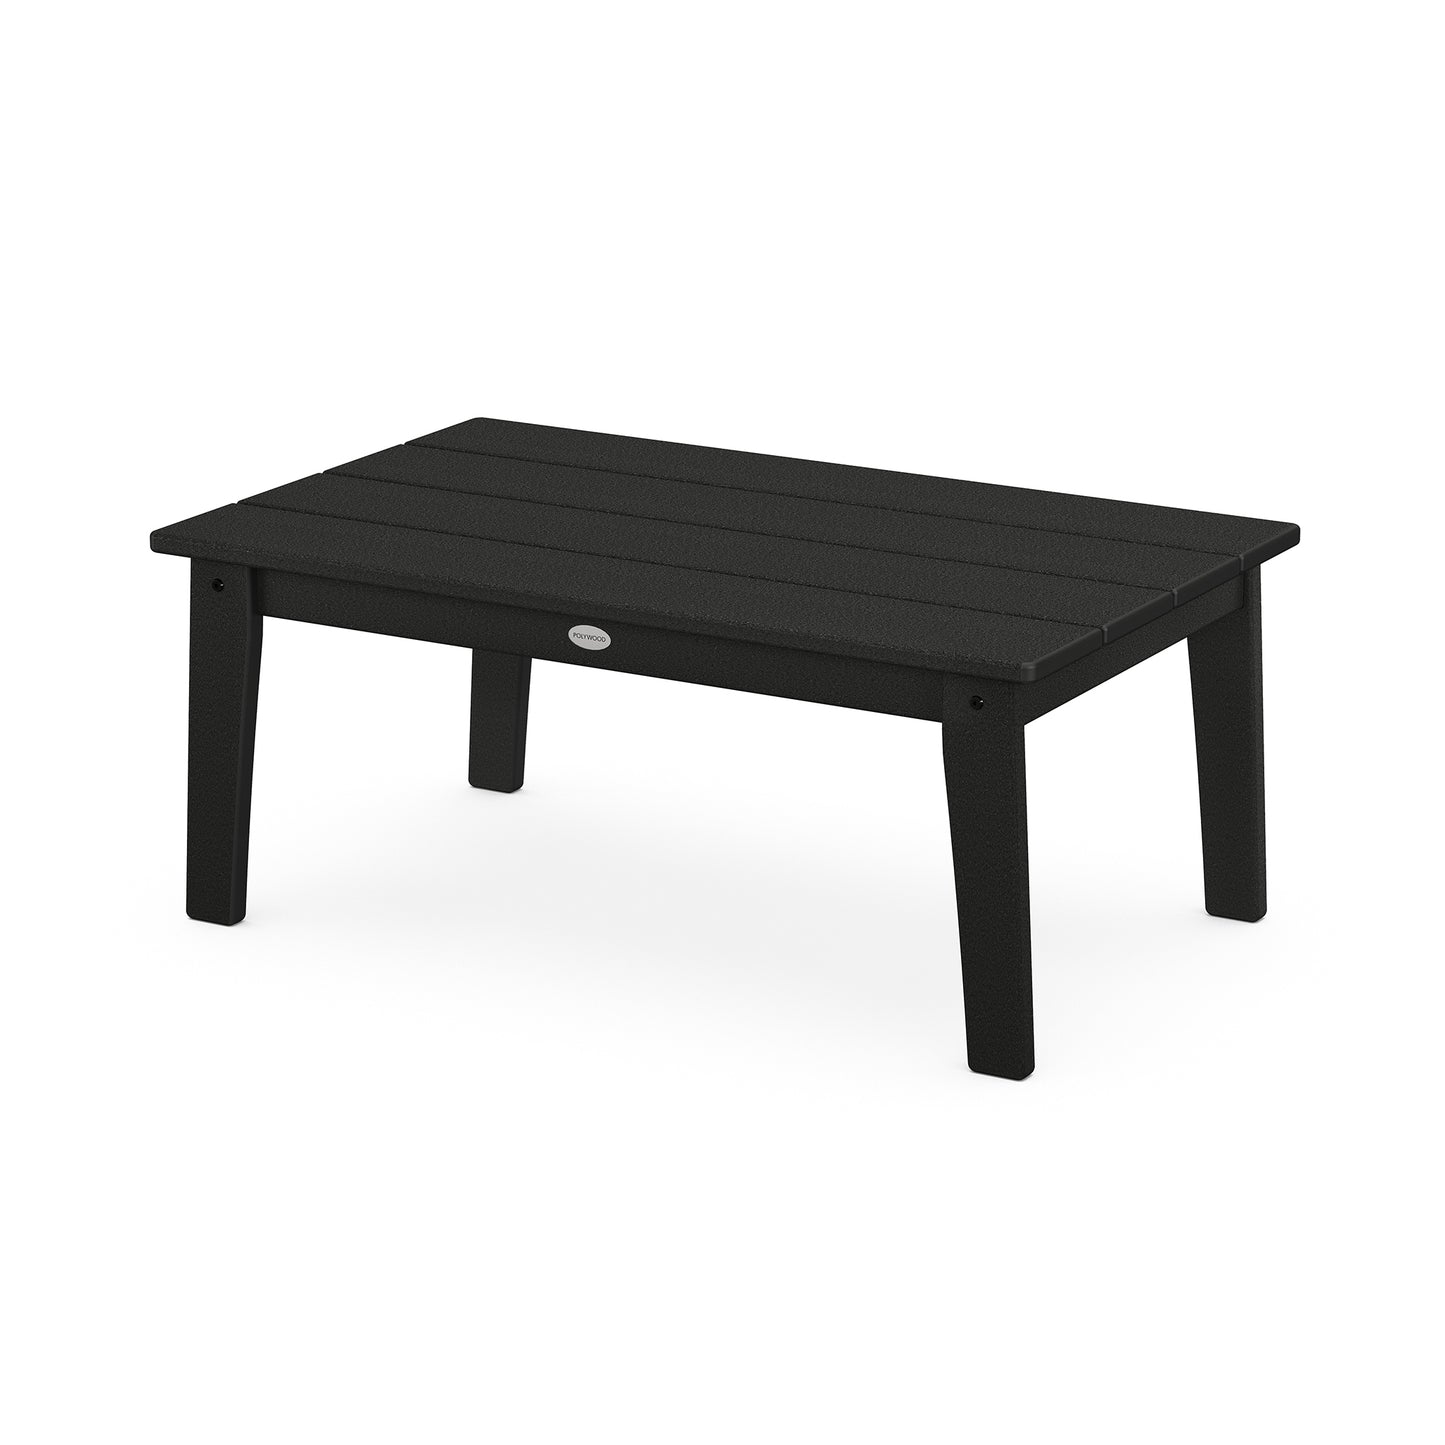 A black rectangular POLYWOOD Lakeside 23" x 36" coffee table with a slatted top and sturdy, straight legs, set against a plain white background.